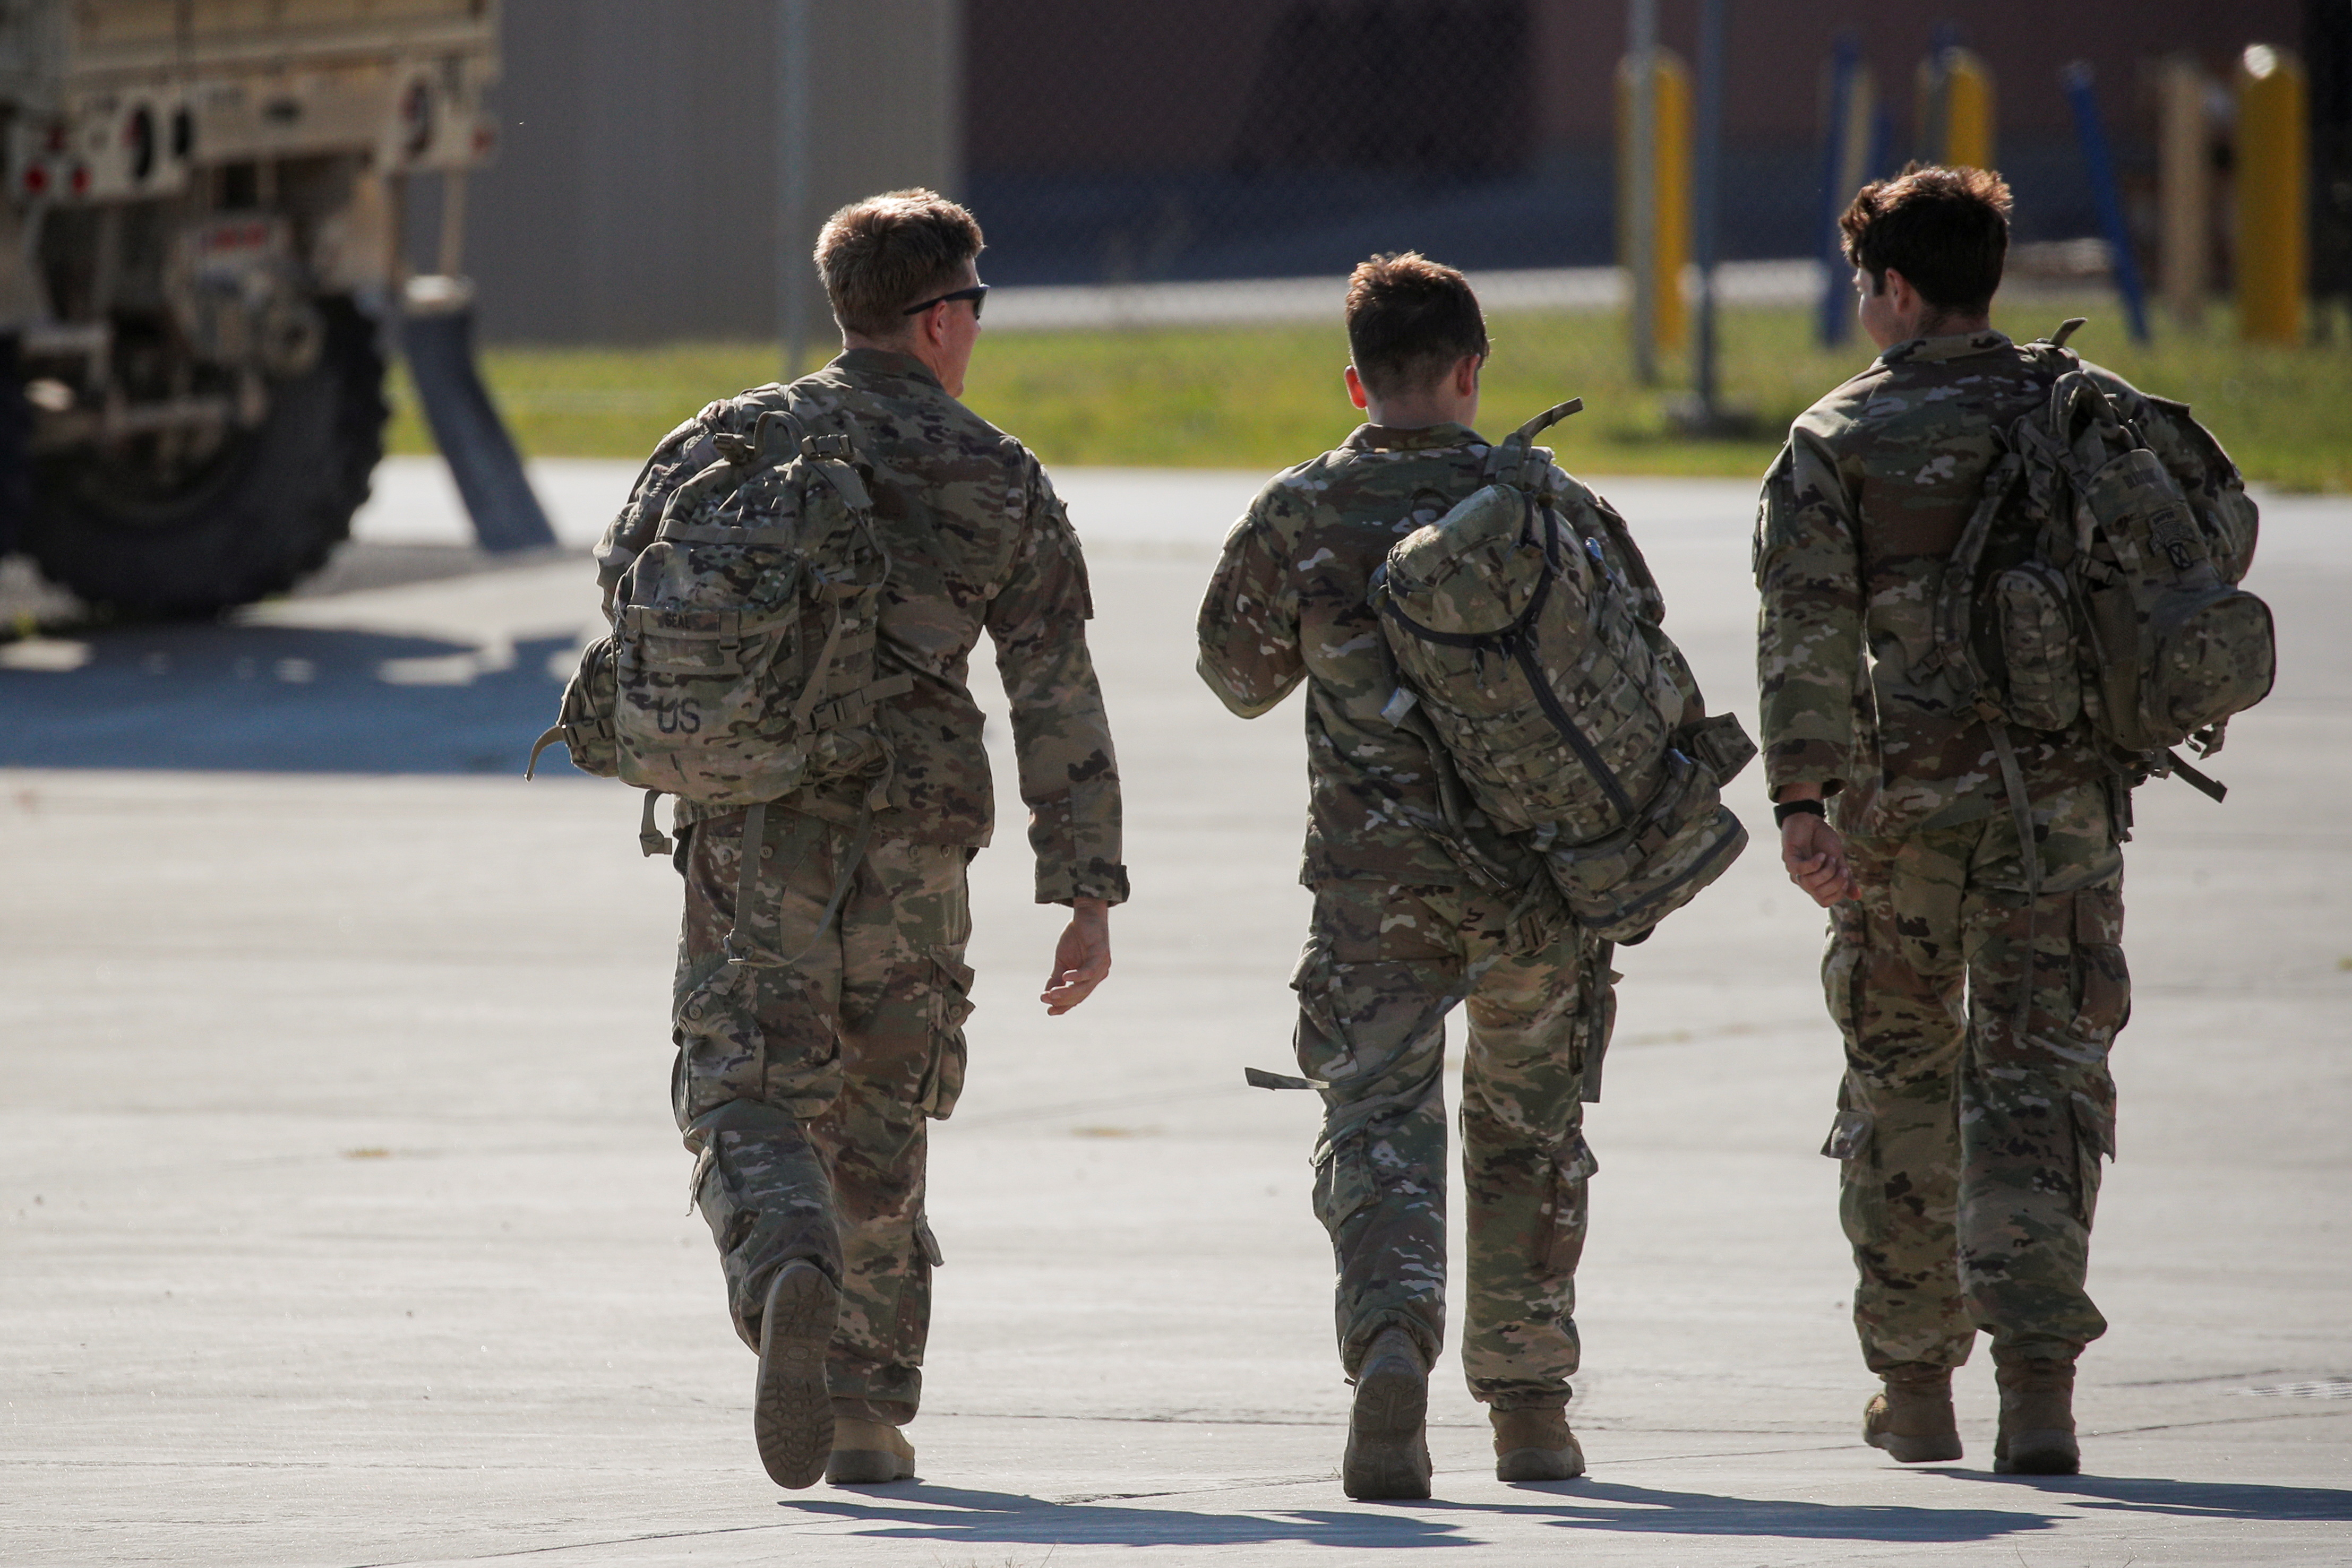 Soldiers walk together after returning home from deployment in Afghanistan, at Fort Drum, New York